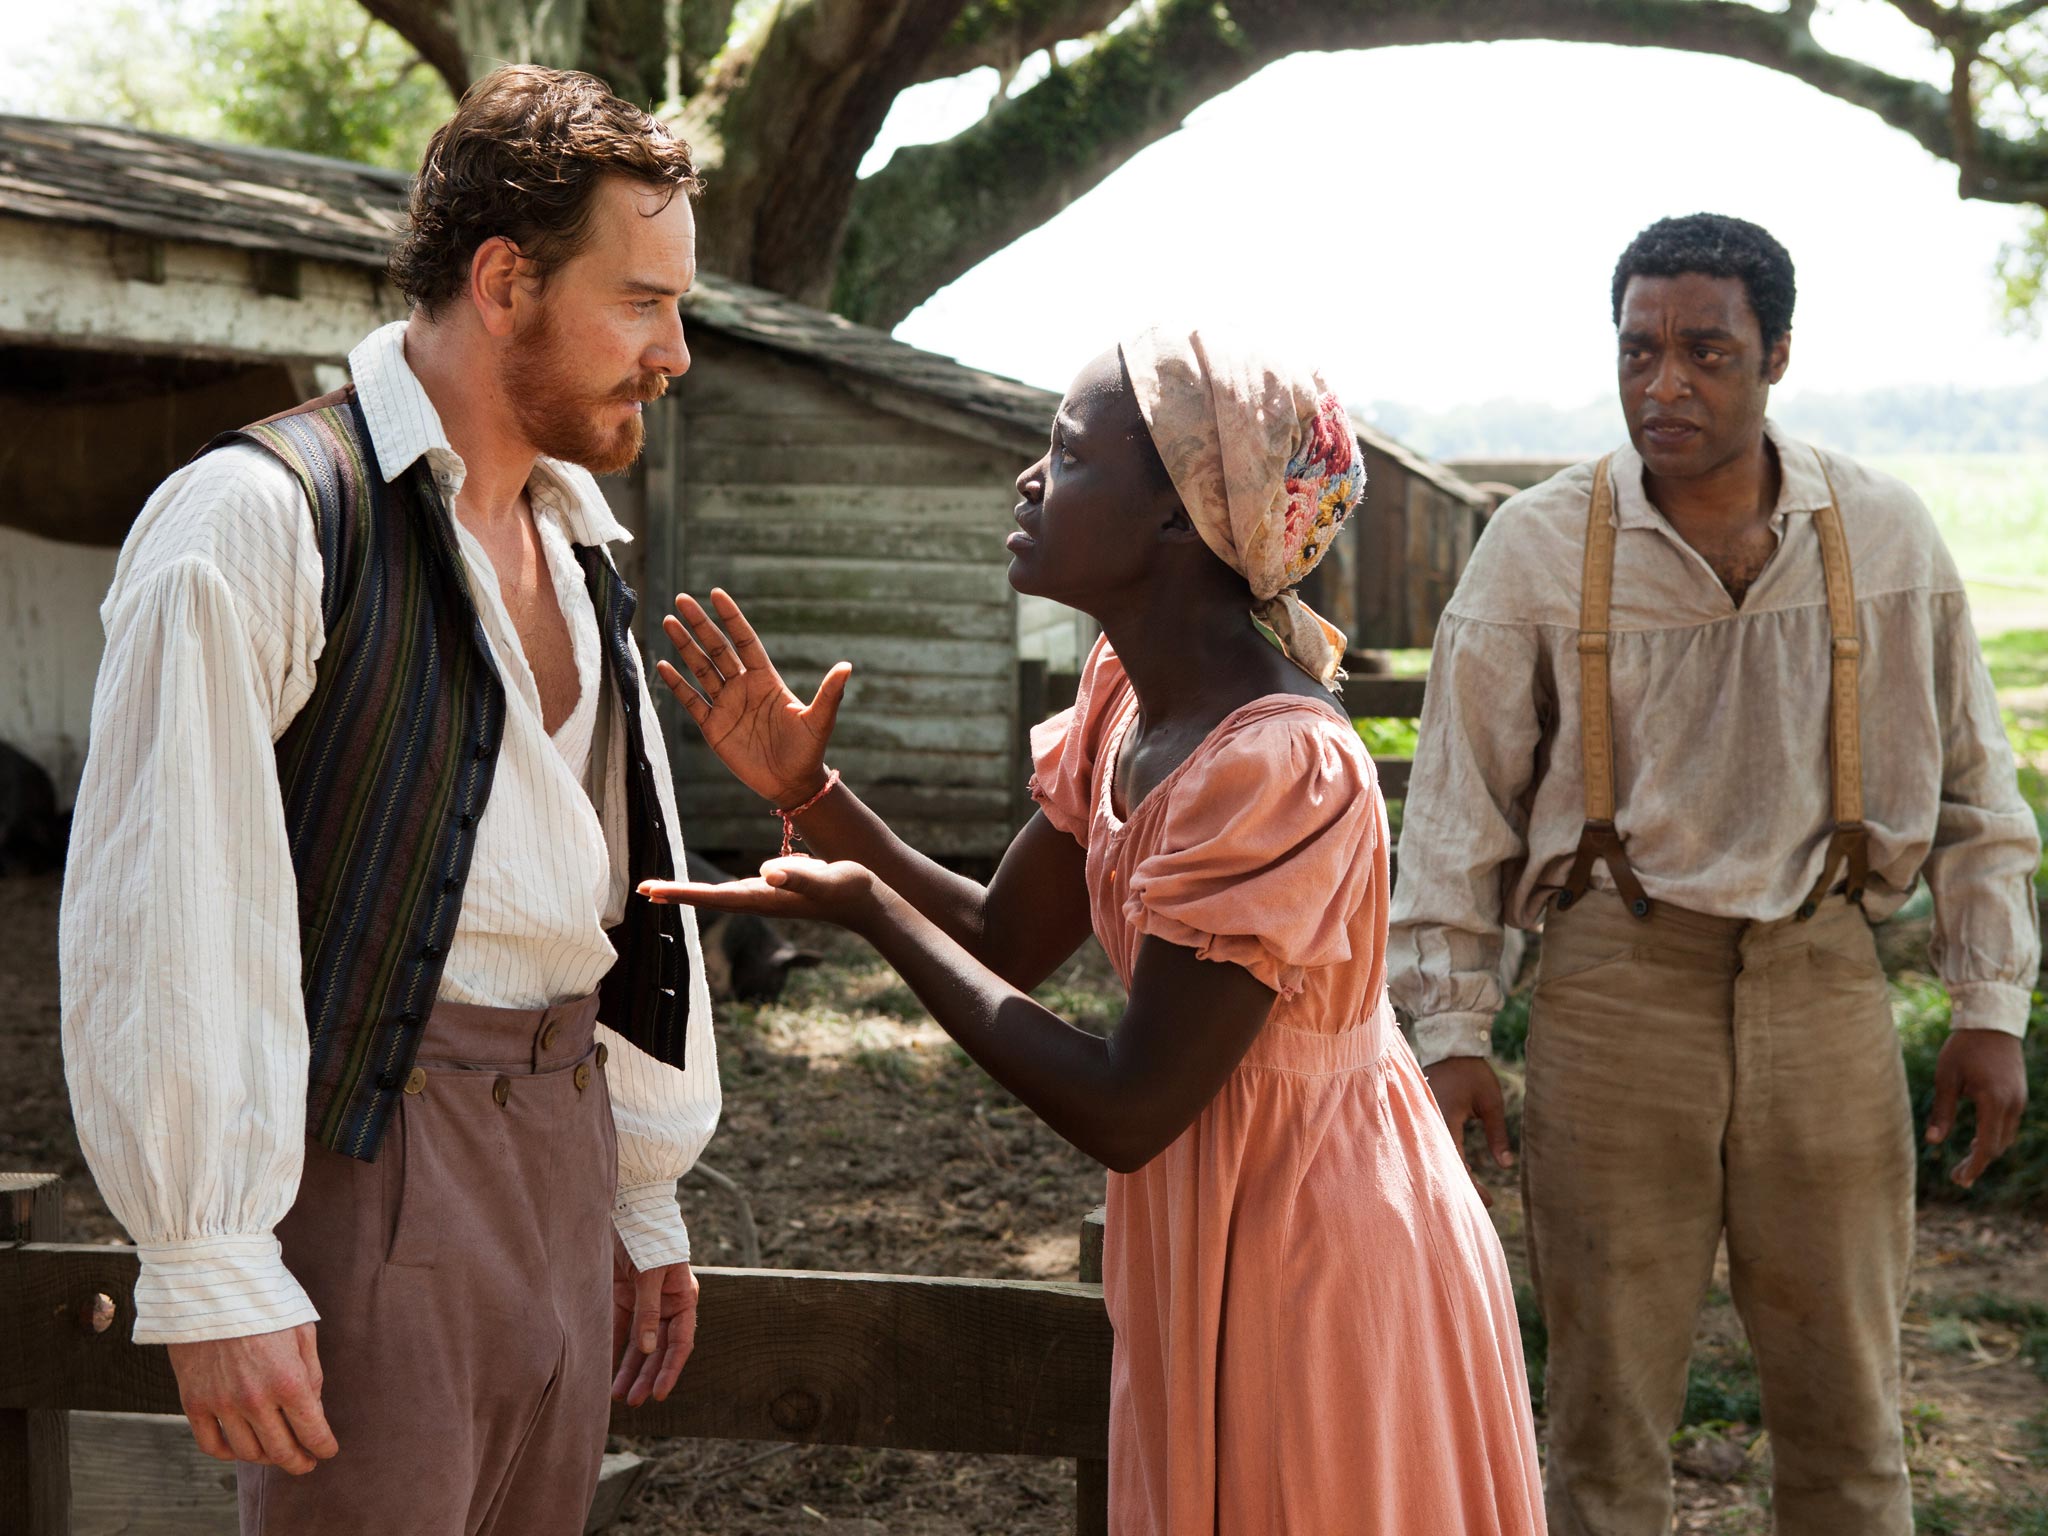 Steve McQueen became the first black director to win the Academy Award for Best Picture with 12 Years a Slave